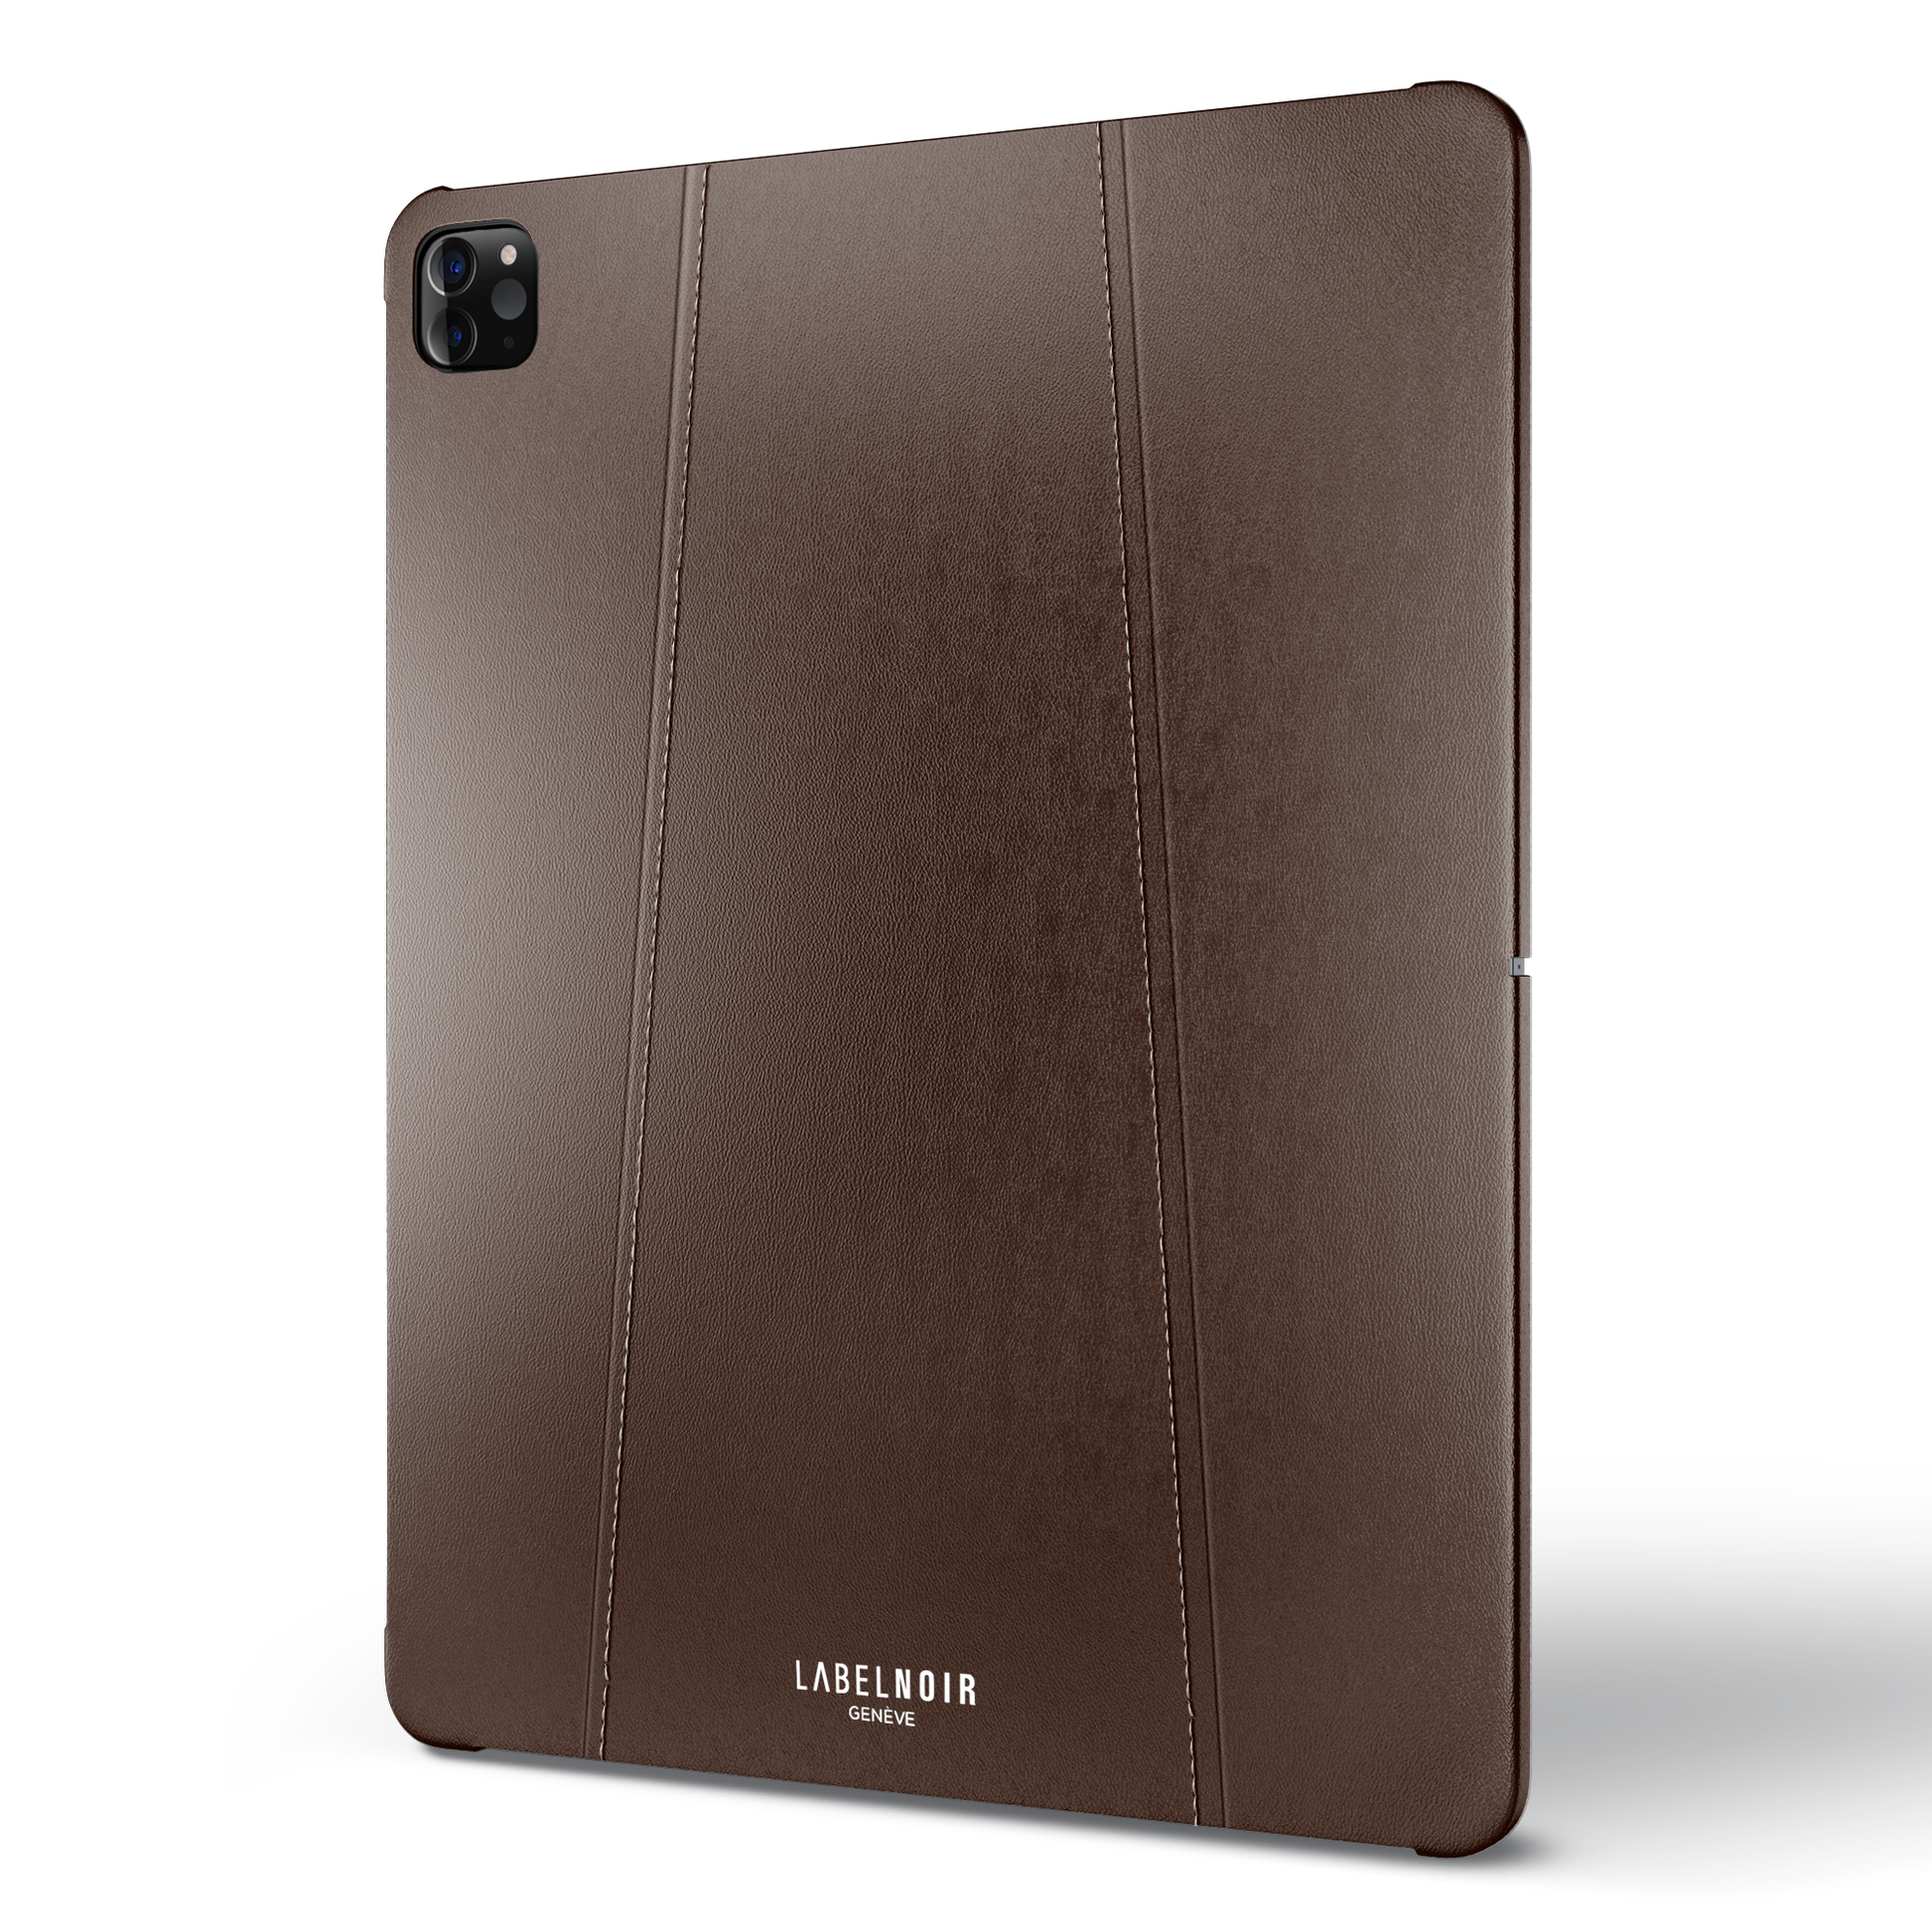 Ipad Pro (2nd-3rd-4th Gen) 11-inch Brown Leather Case